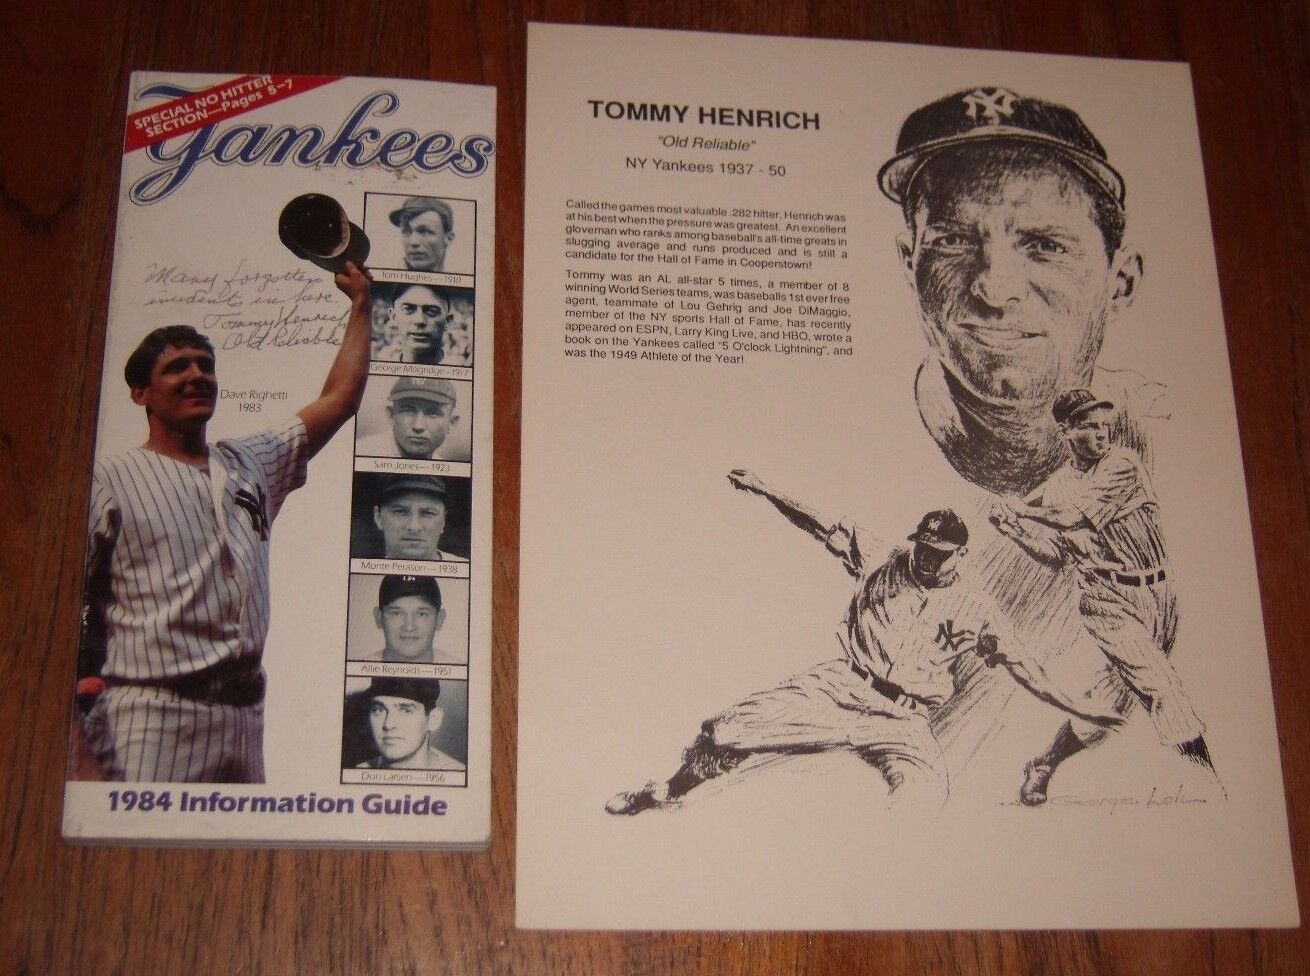 NEW YORK YANKEES Tommy Henrich signed 1984 Yankees media guide with notation